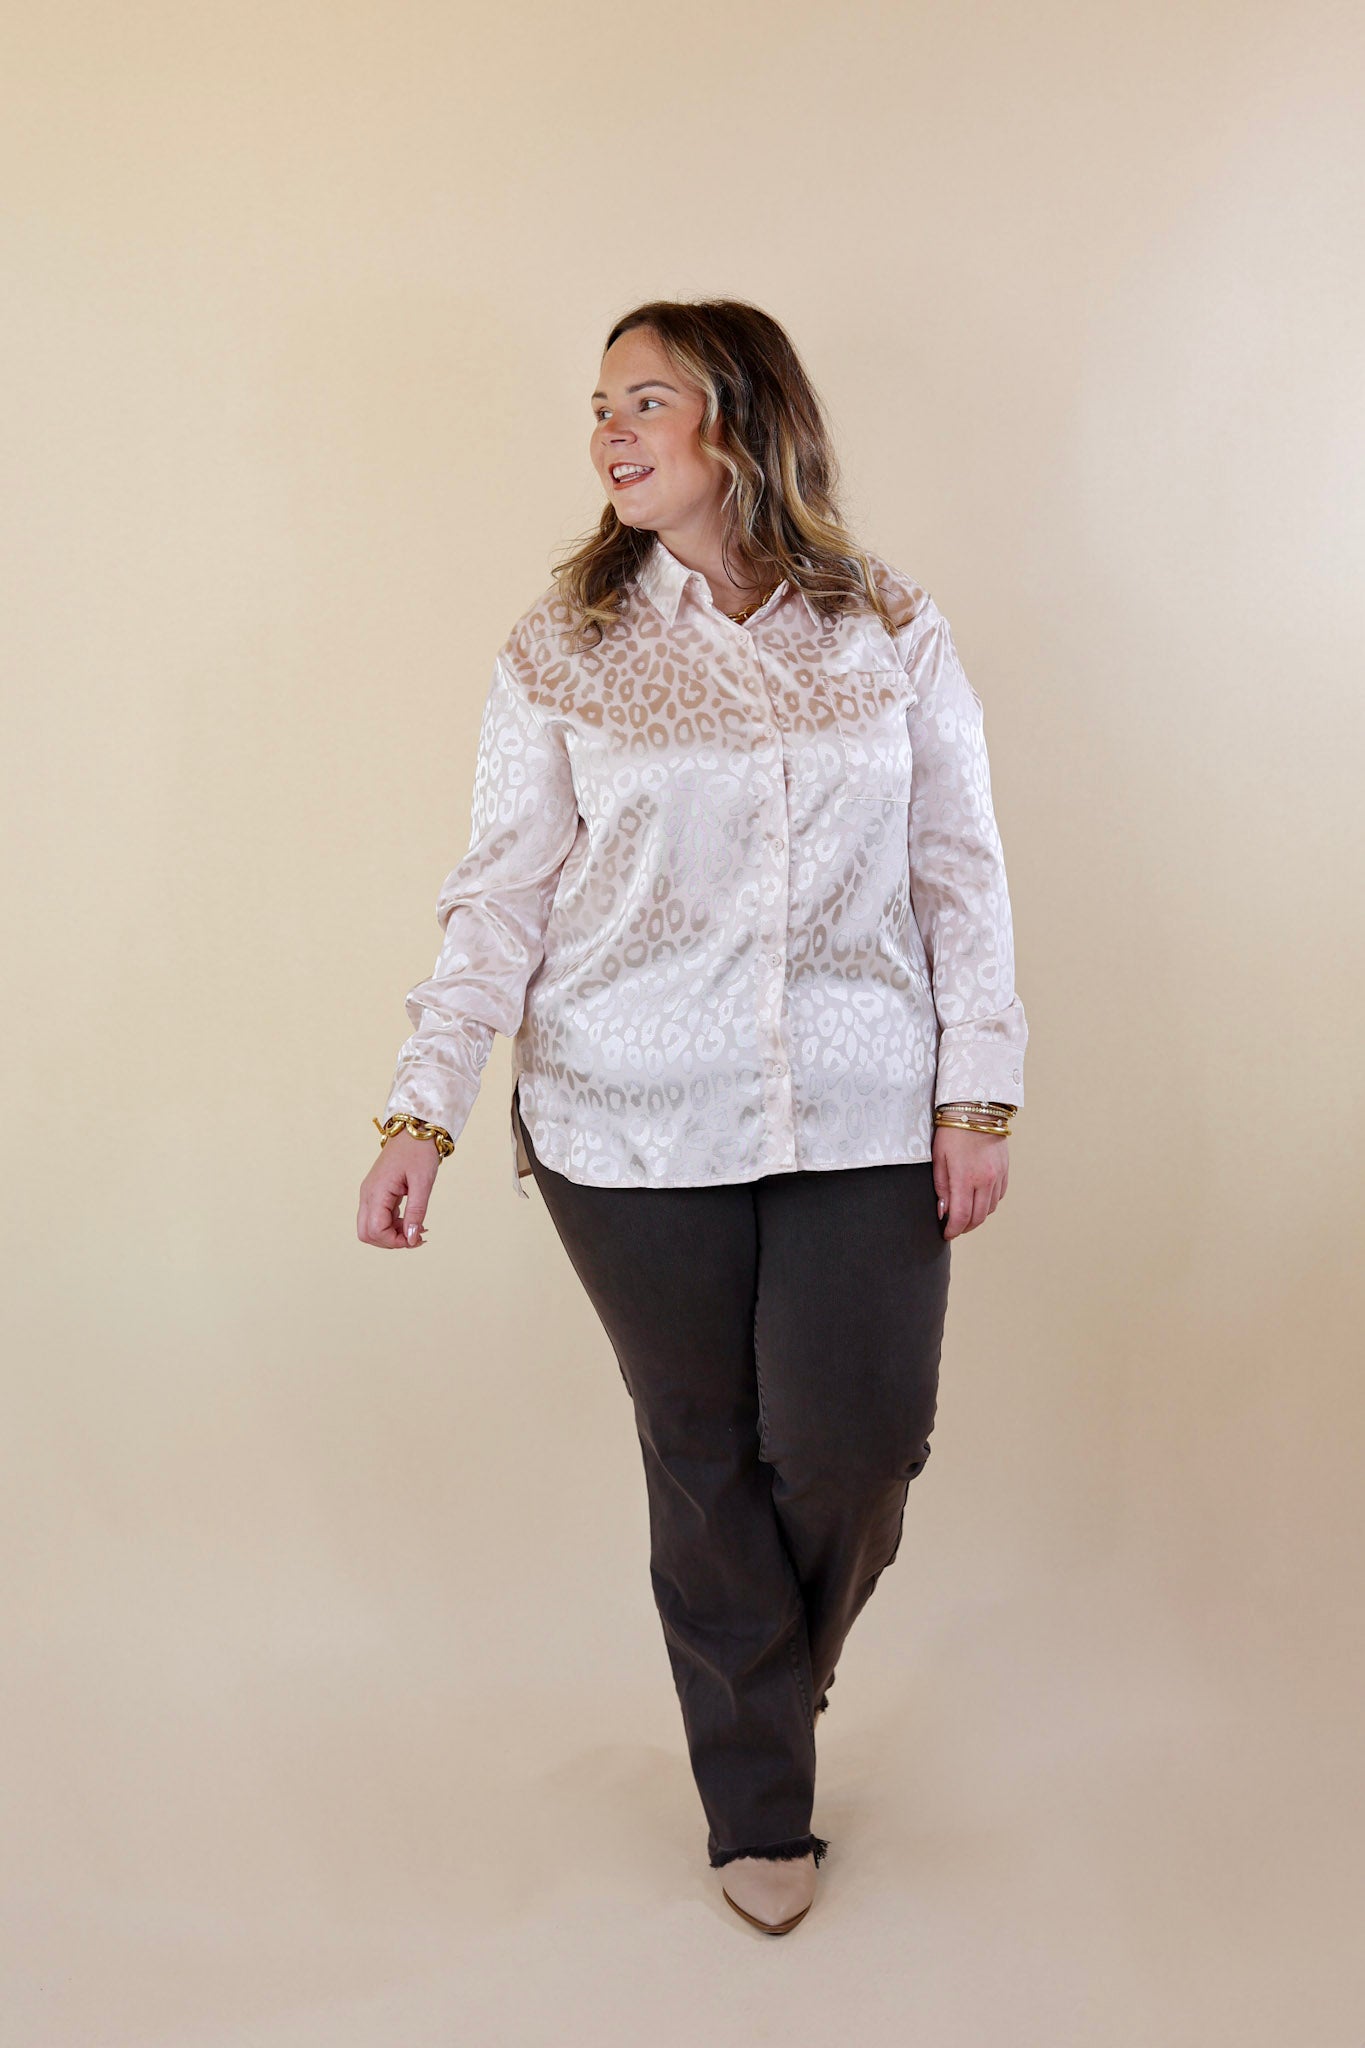 Top It Off Long Sleeve Button Up Satin Leopard Top in Ivory - Giddy Up Glamour Boutique